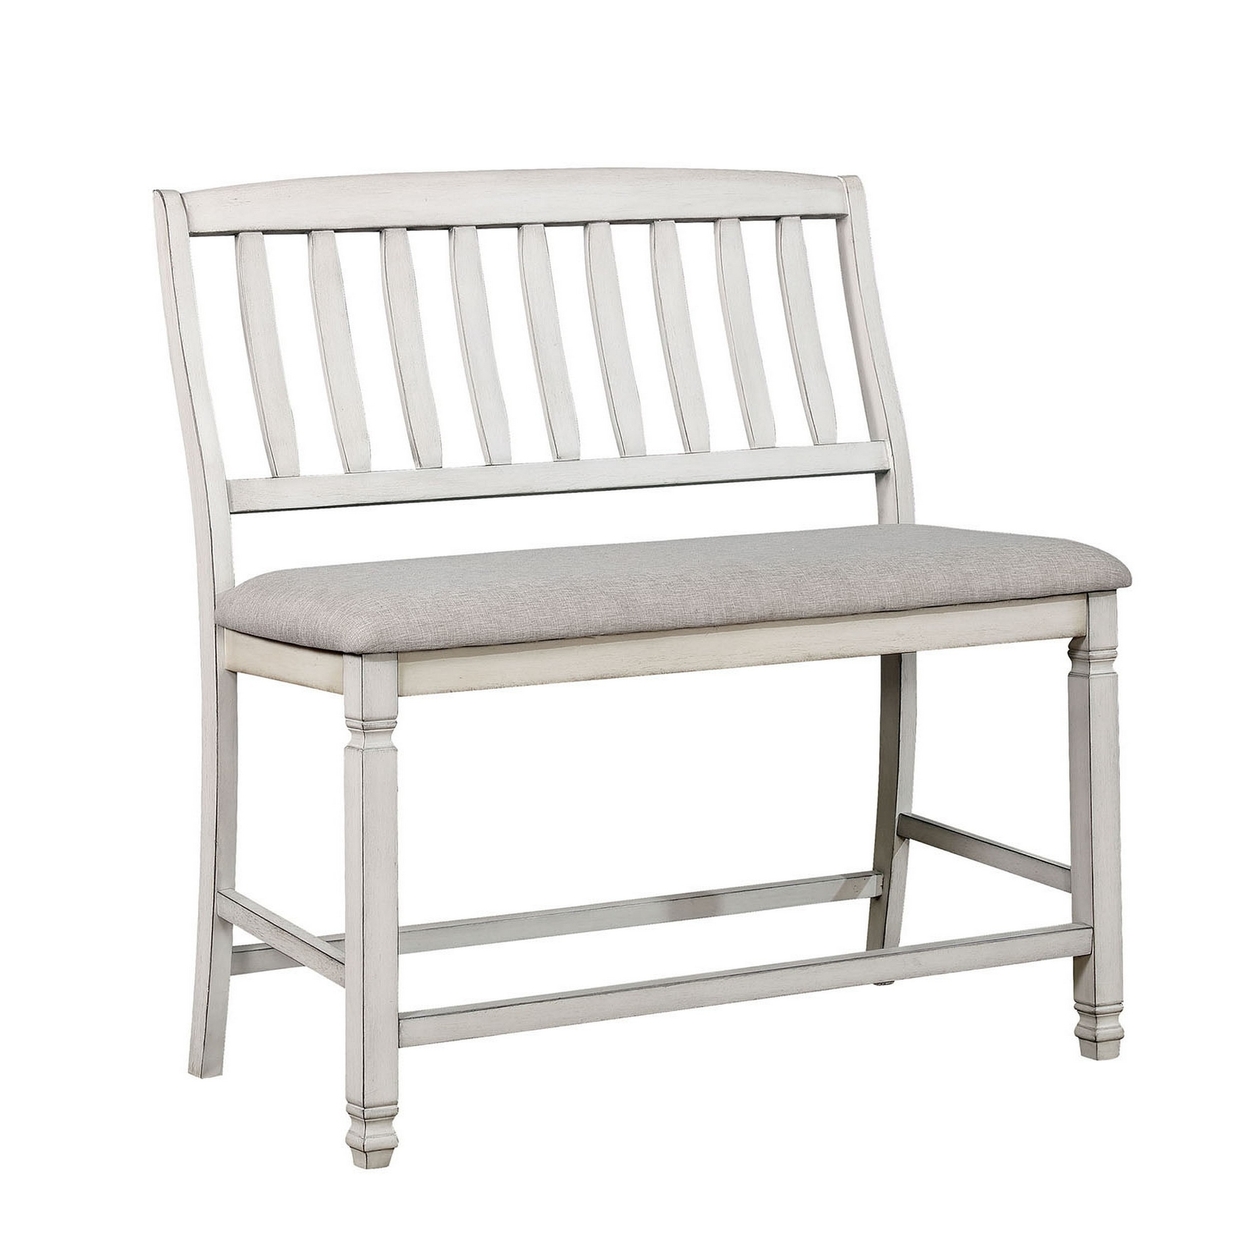 Fabric Upholstered Wooden Counter Height Bench With Slat Back, White- Saltoro Sherpi